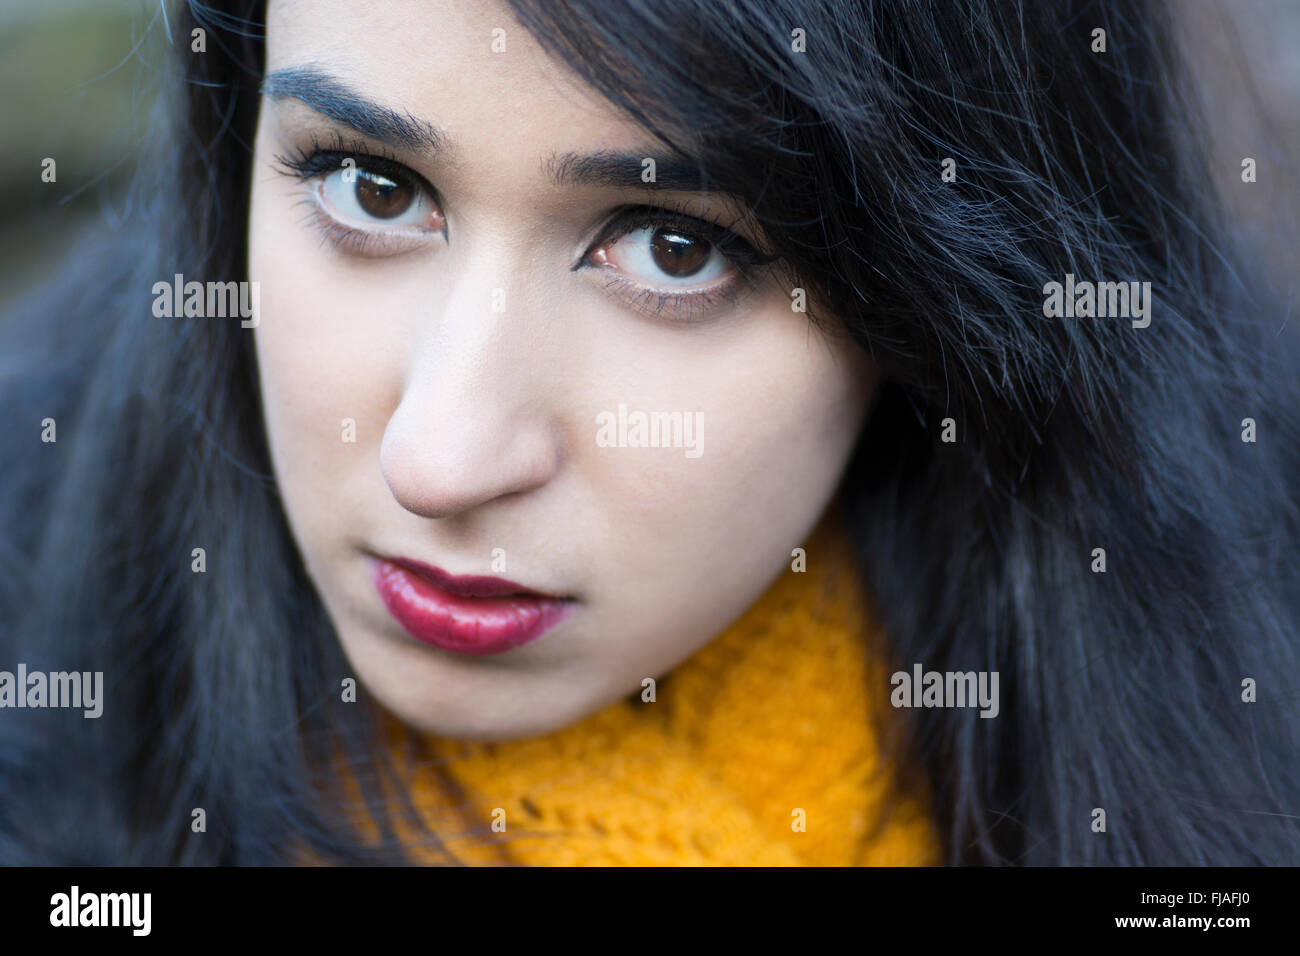 Close up of a serious young woman Stock Photo